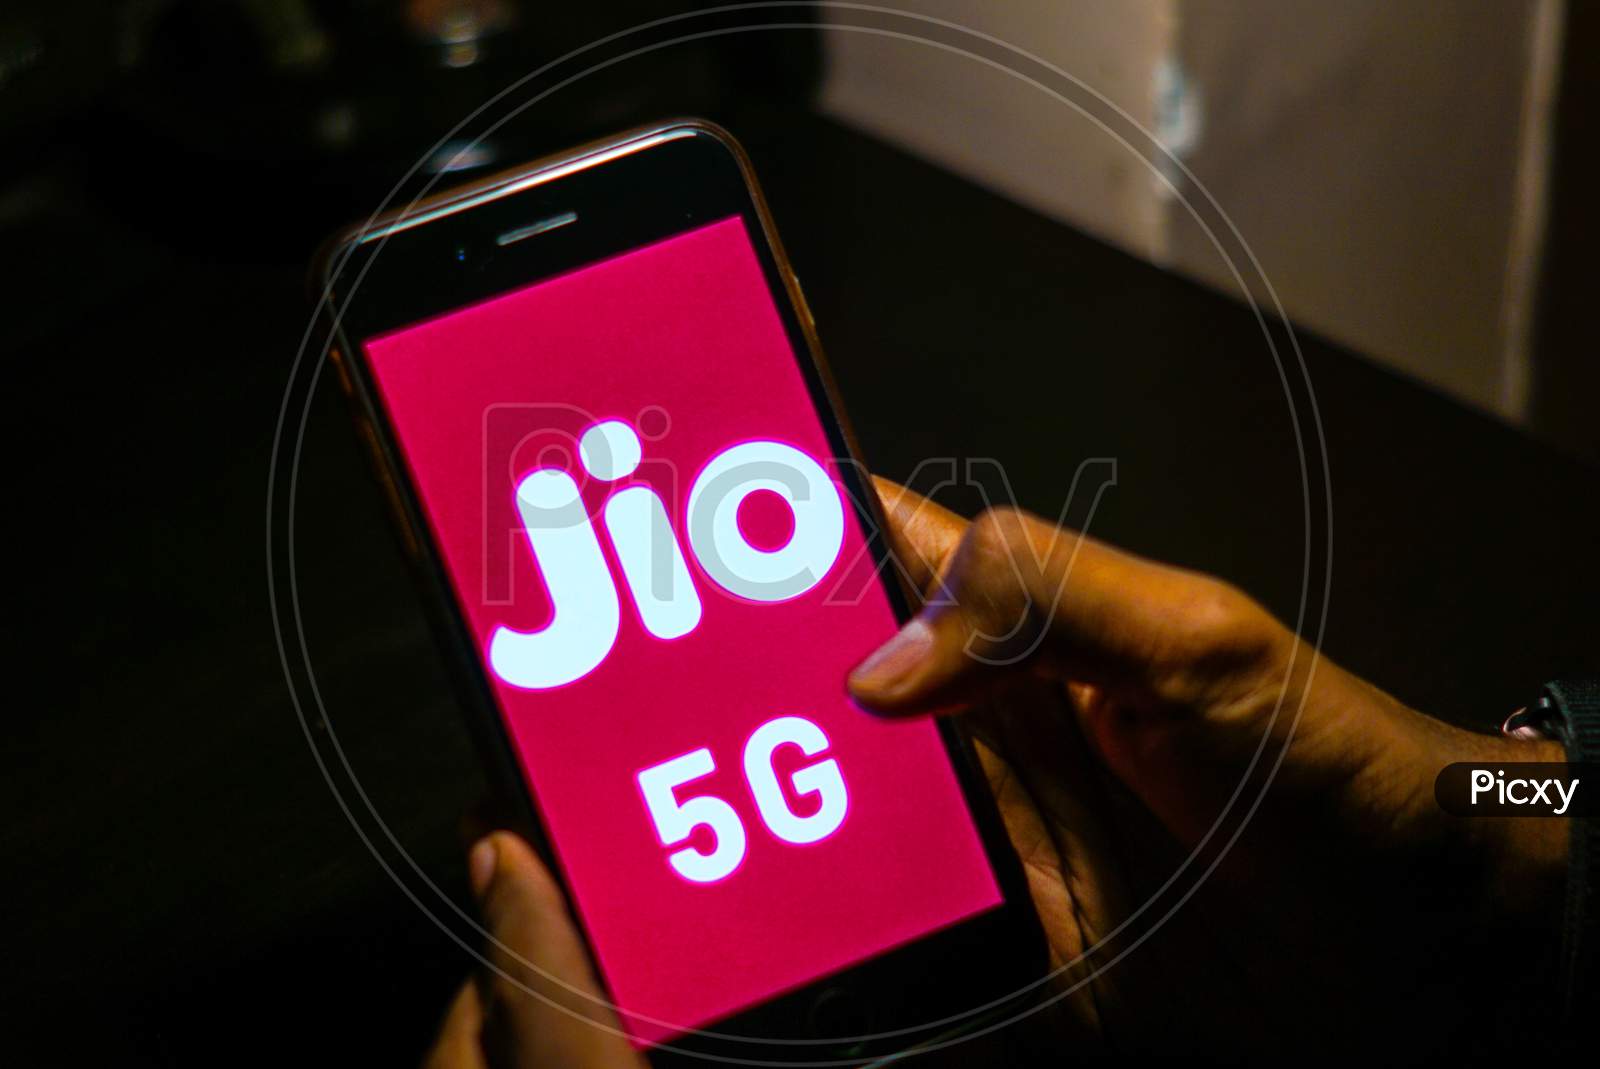 Close up shot of a Person using a Smartphone or Mobile Phone with Jio 5g on Screen